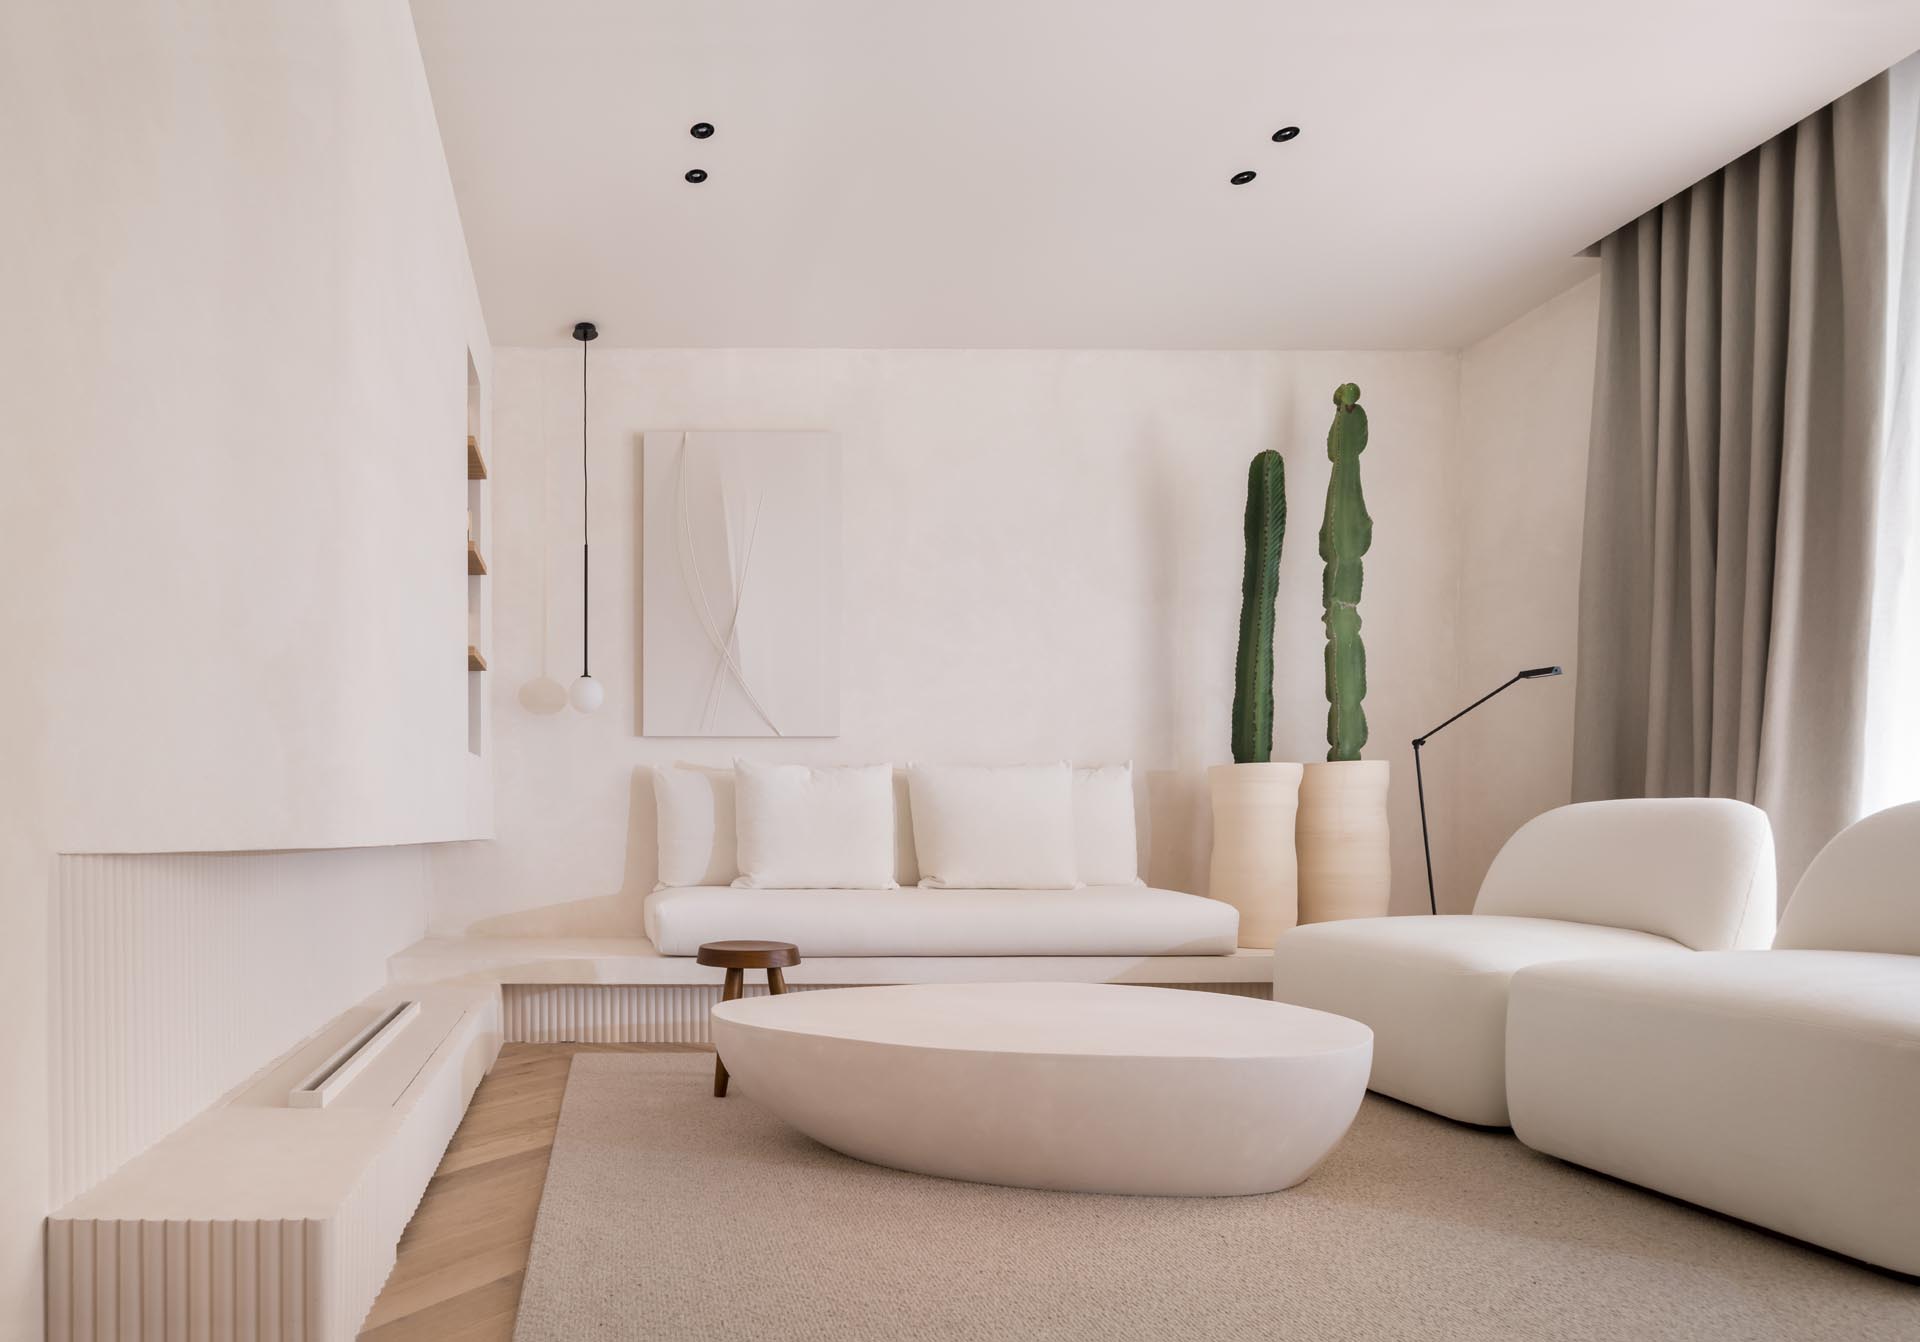 A living room with a simple white color palette, a built-in fireplace, and furniture with curved edges that creates a calm environment with a modern flair.